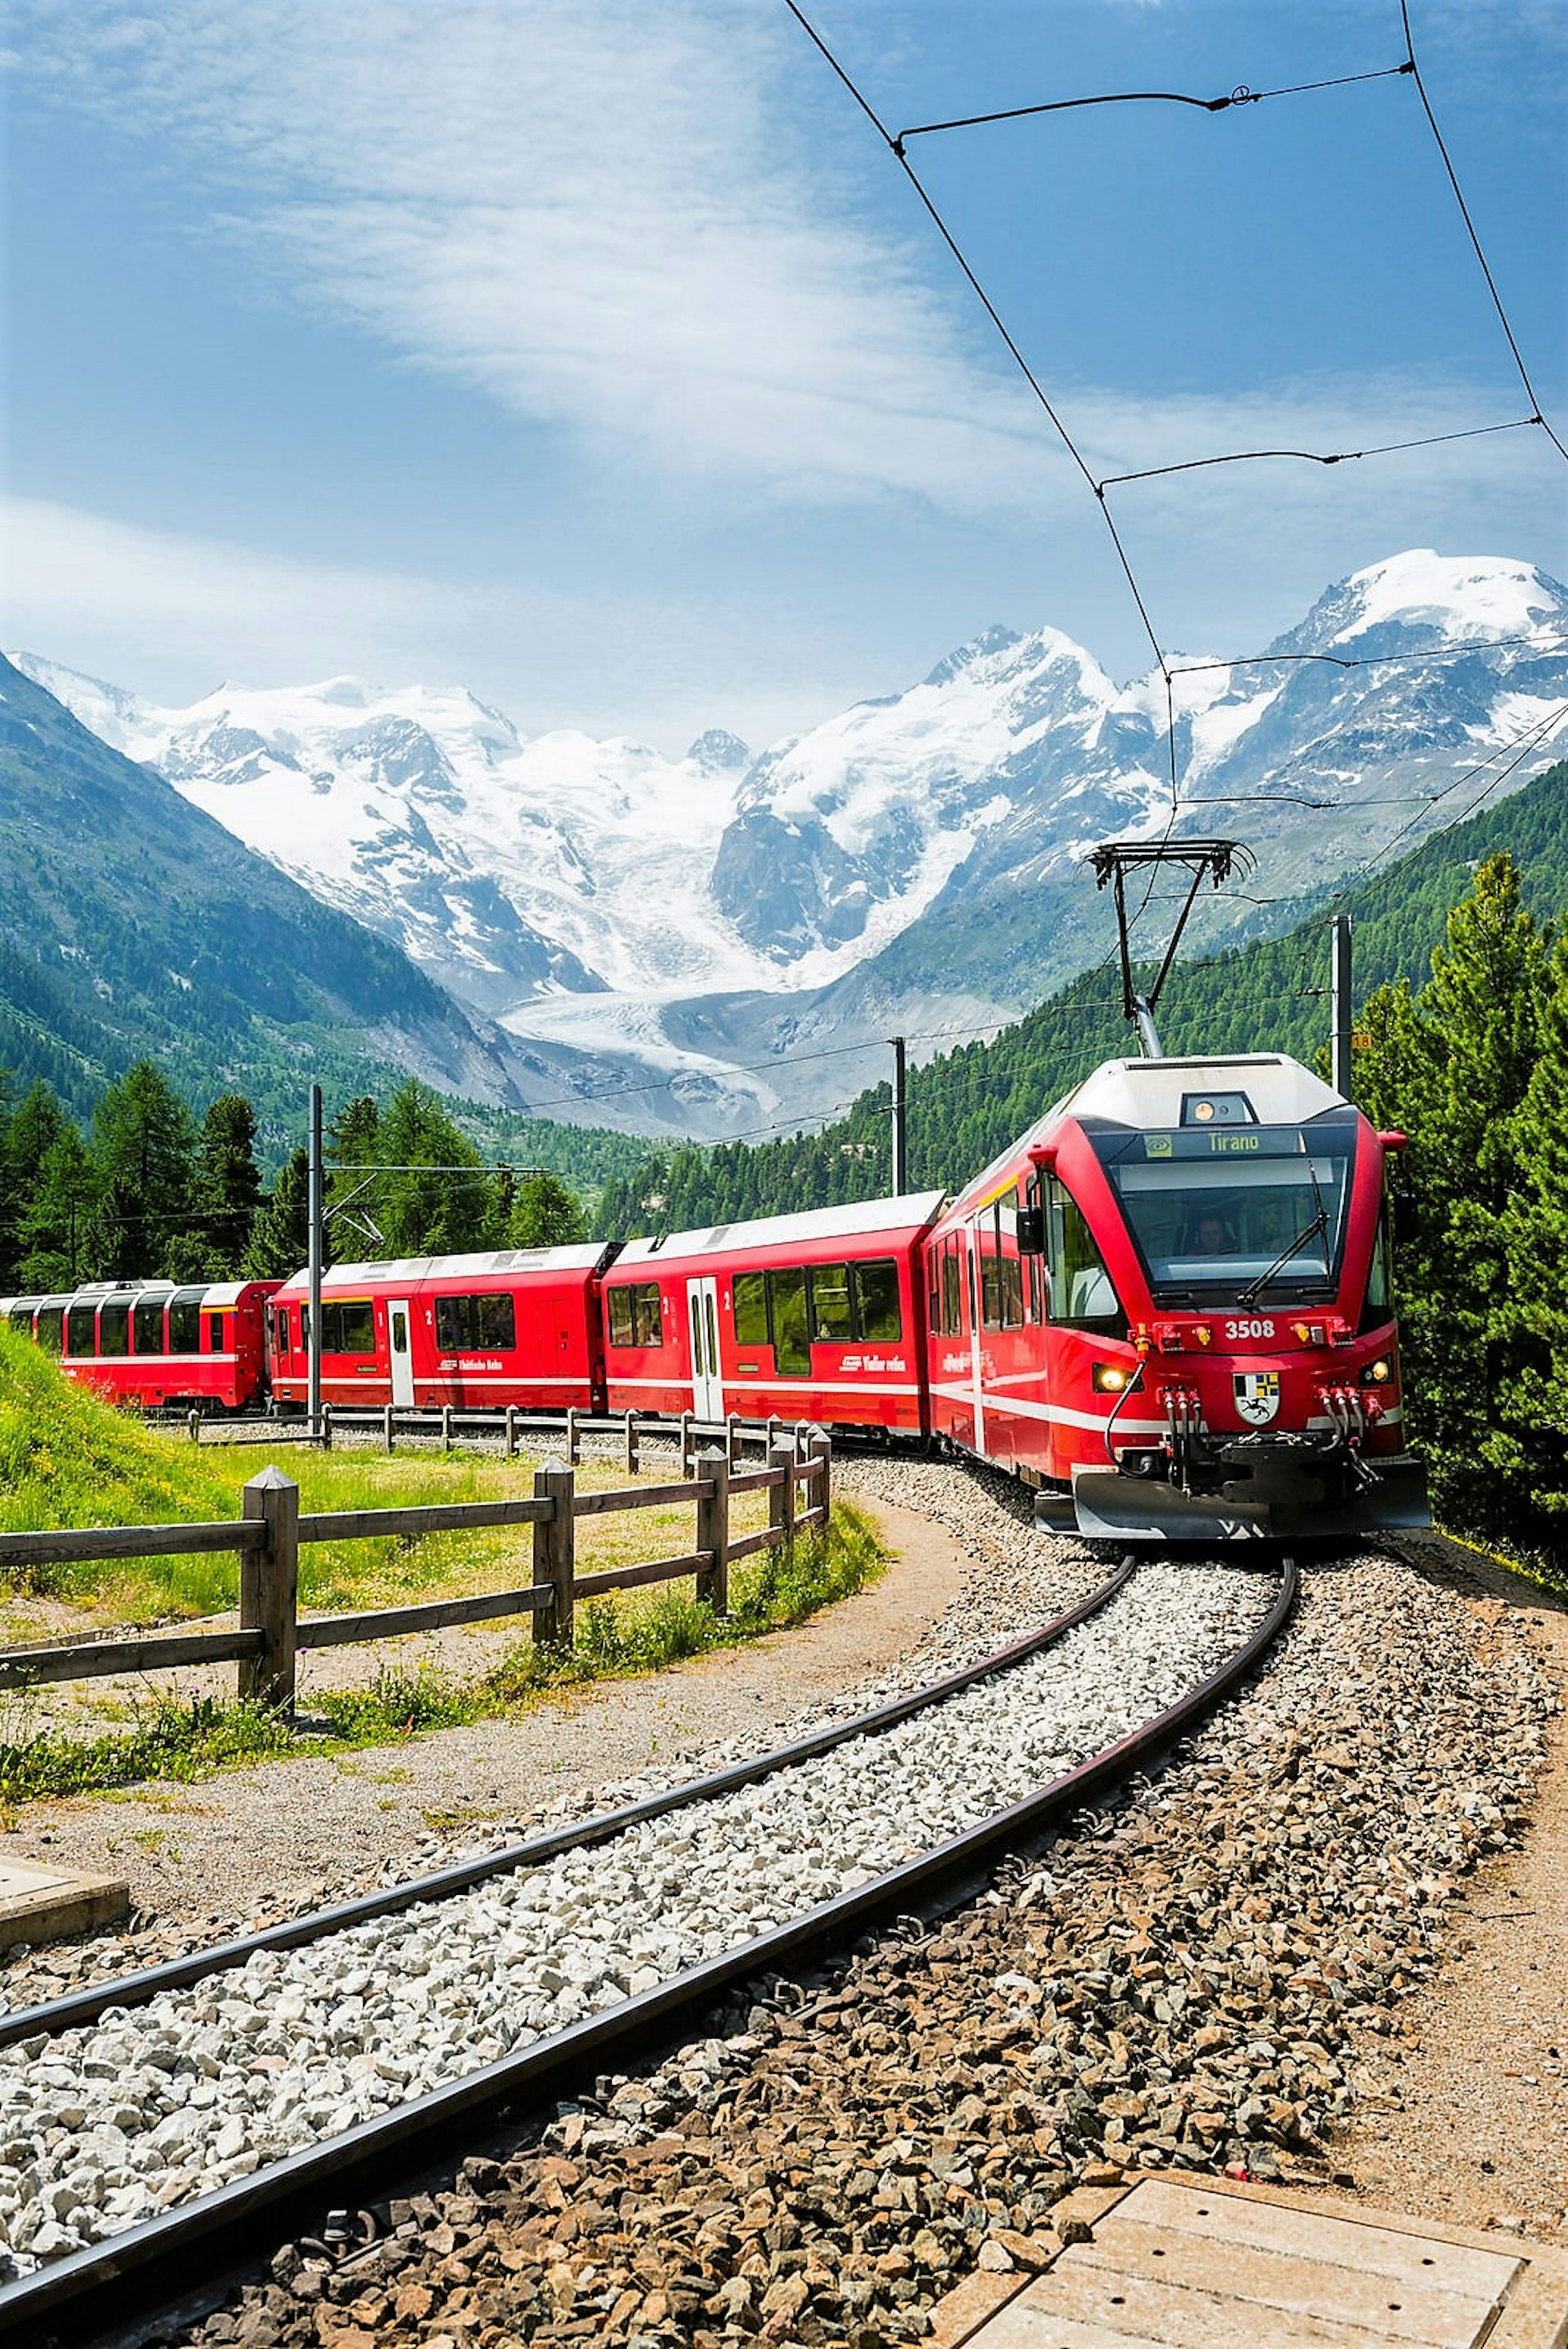 The Bernina Express train follows a curving track with mountains all around it